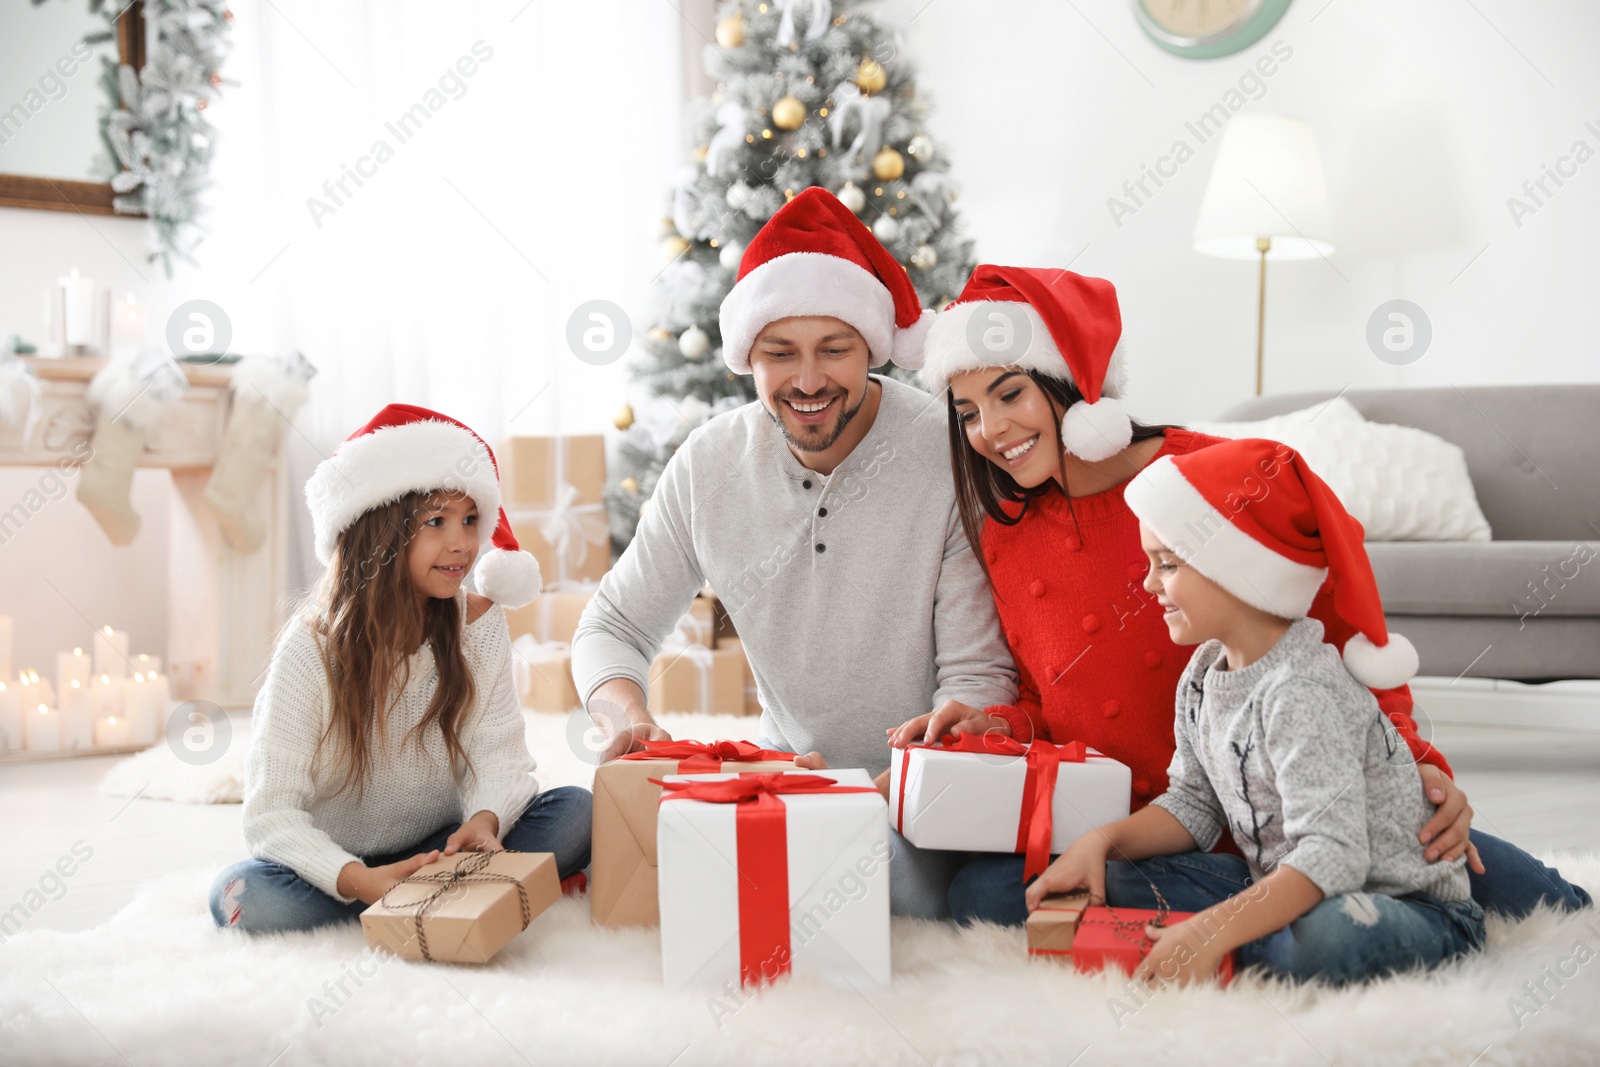 Photo of Happy family with children and Christmas gifts on floor at home